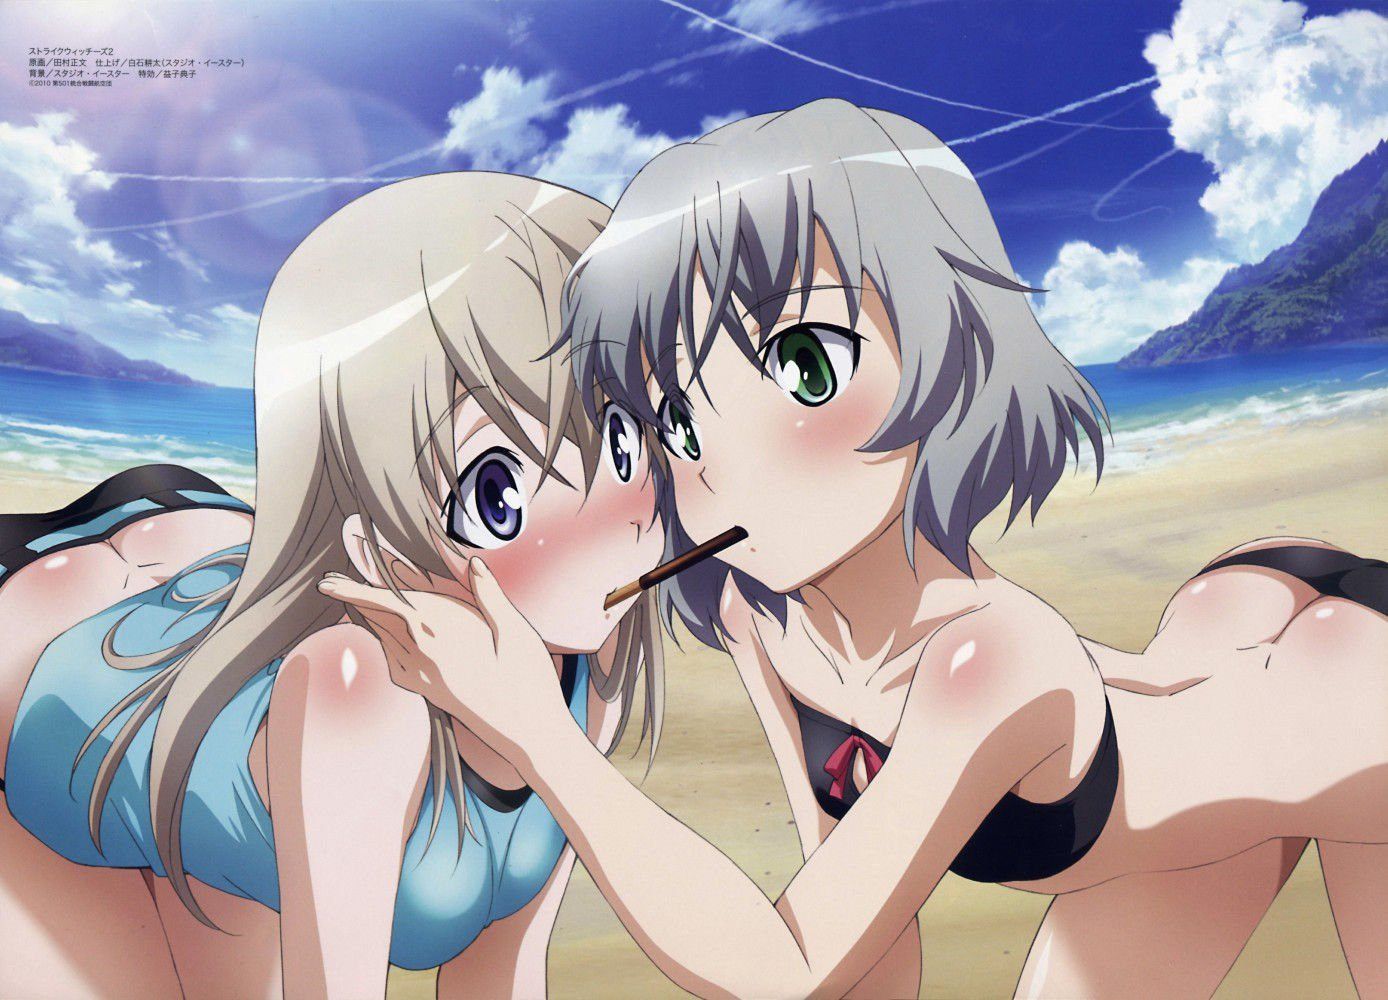 Strike witches hentai images 01 [ZIP] 16